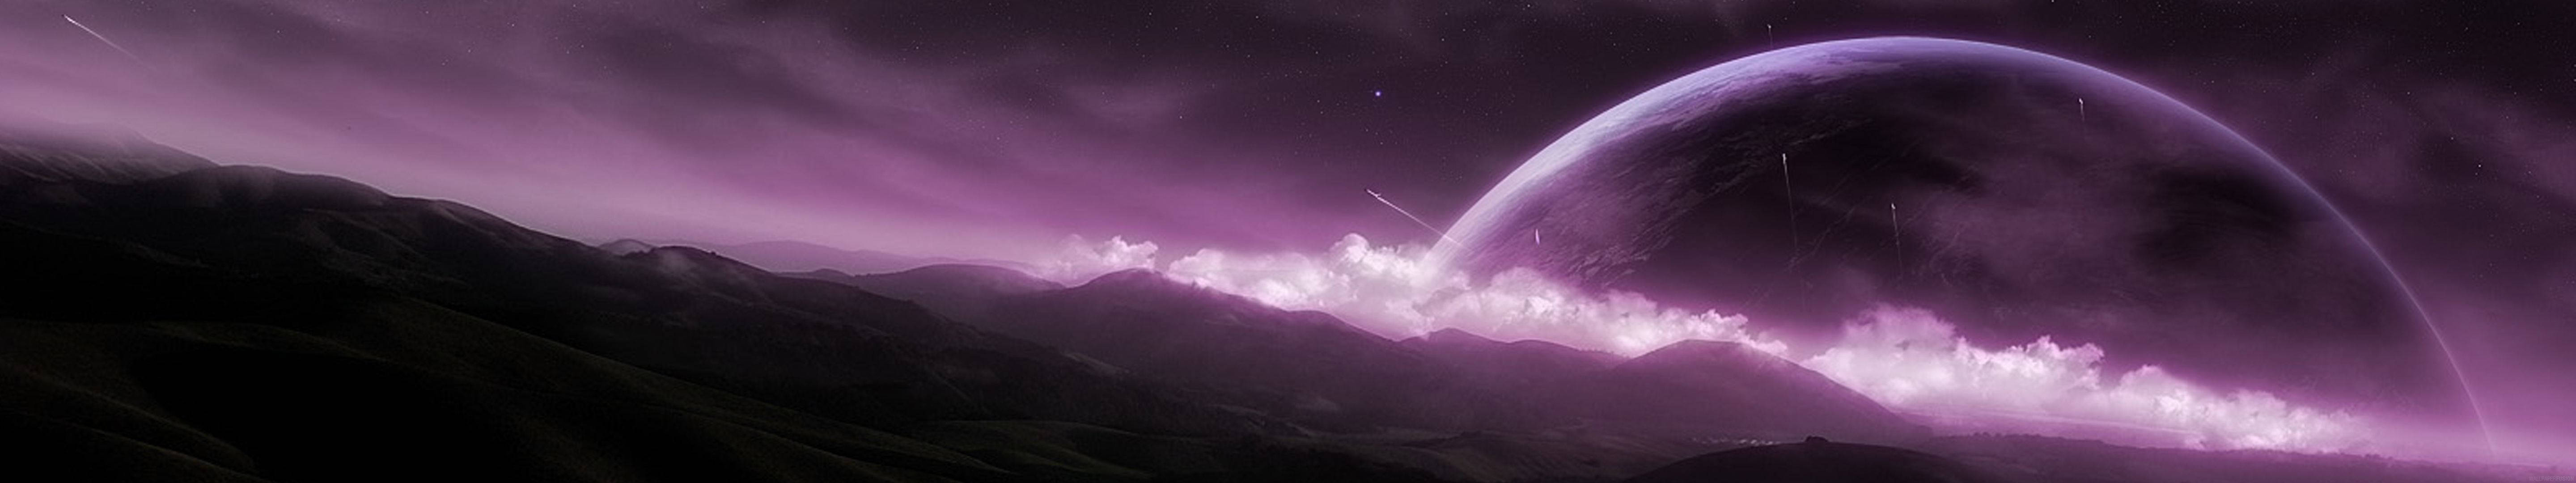 Giant Purple Earth Over Mountains